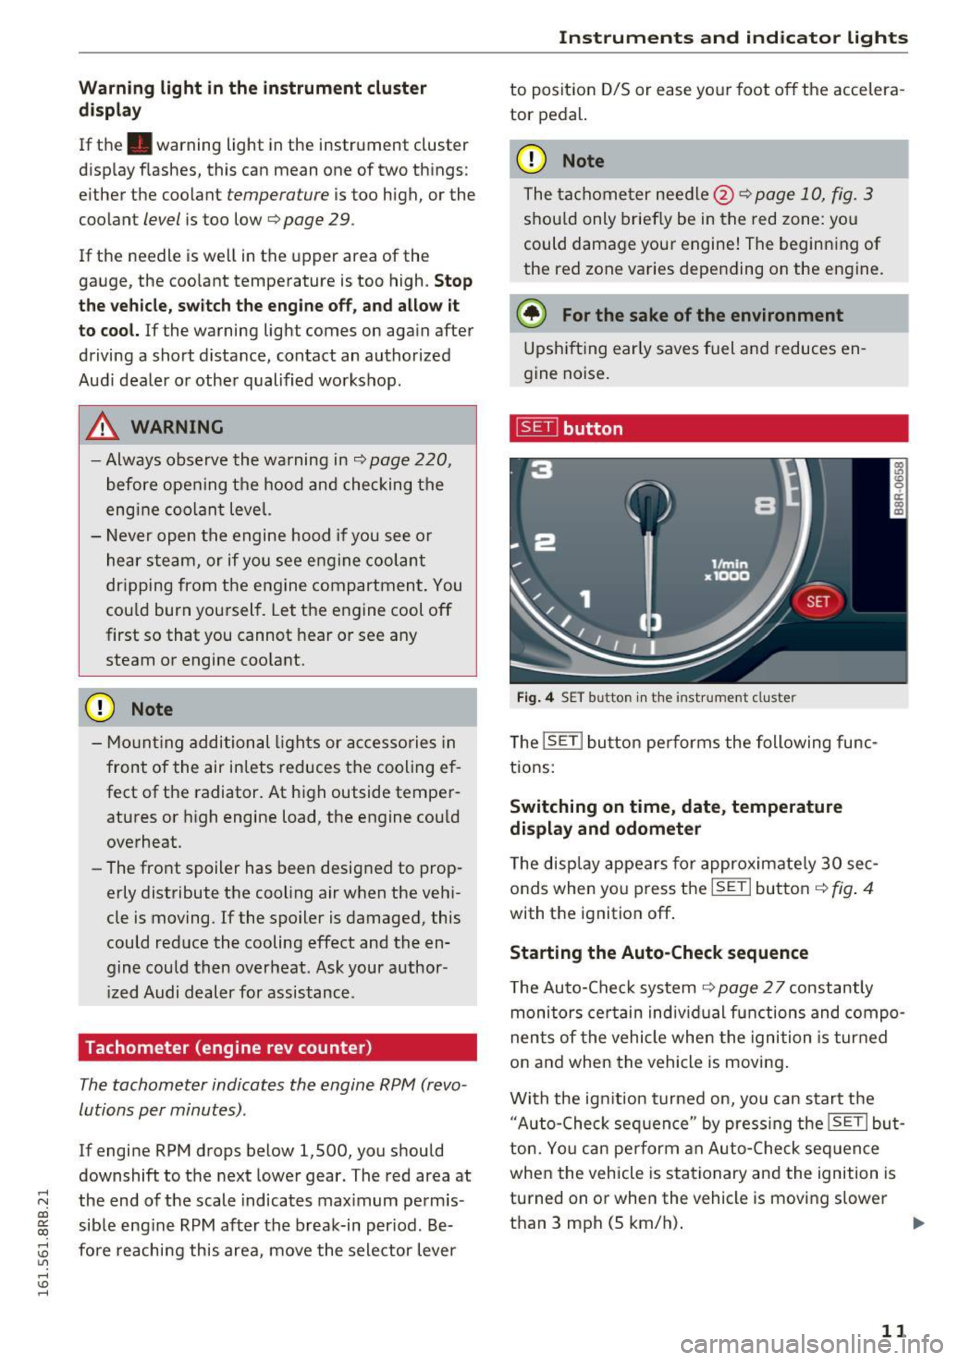 AUDI Q5 2016  Owners Manual ..... N 
co ~ CX) 
Warning  light  in the  instrument  cluster 
display 
If the . warning  light  in the  instrument  cluster 
display  flashes,  this  can  mean  one  of two  things: 
either  the  co